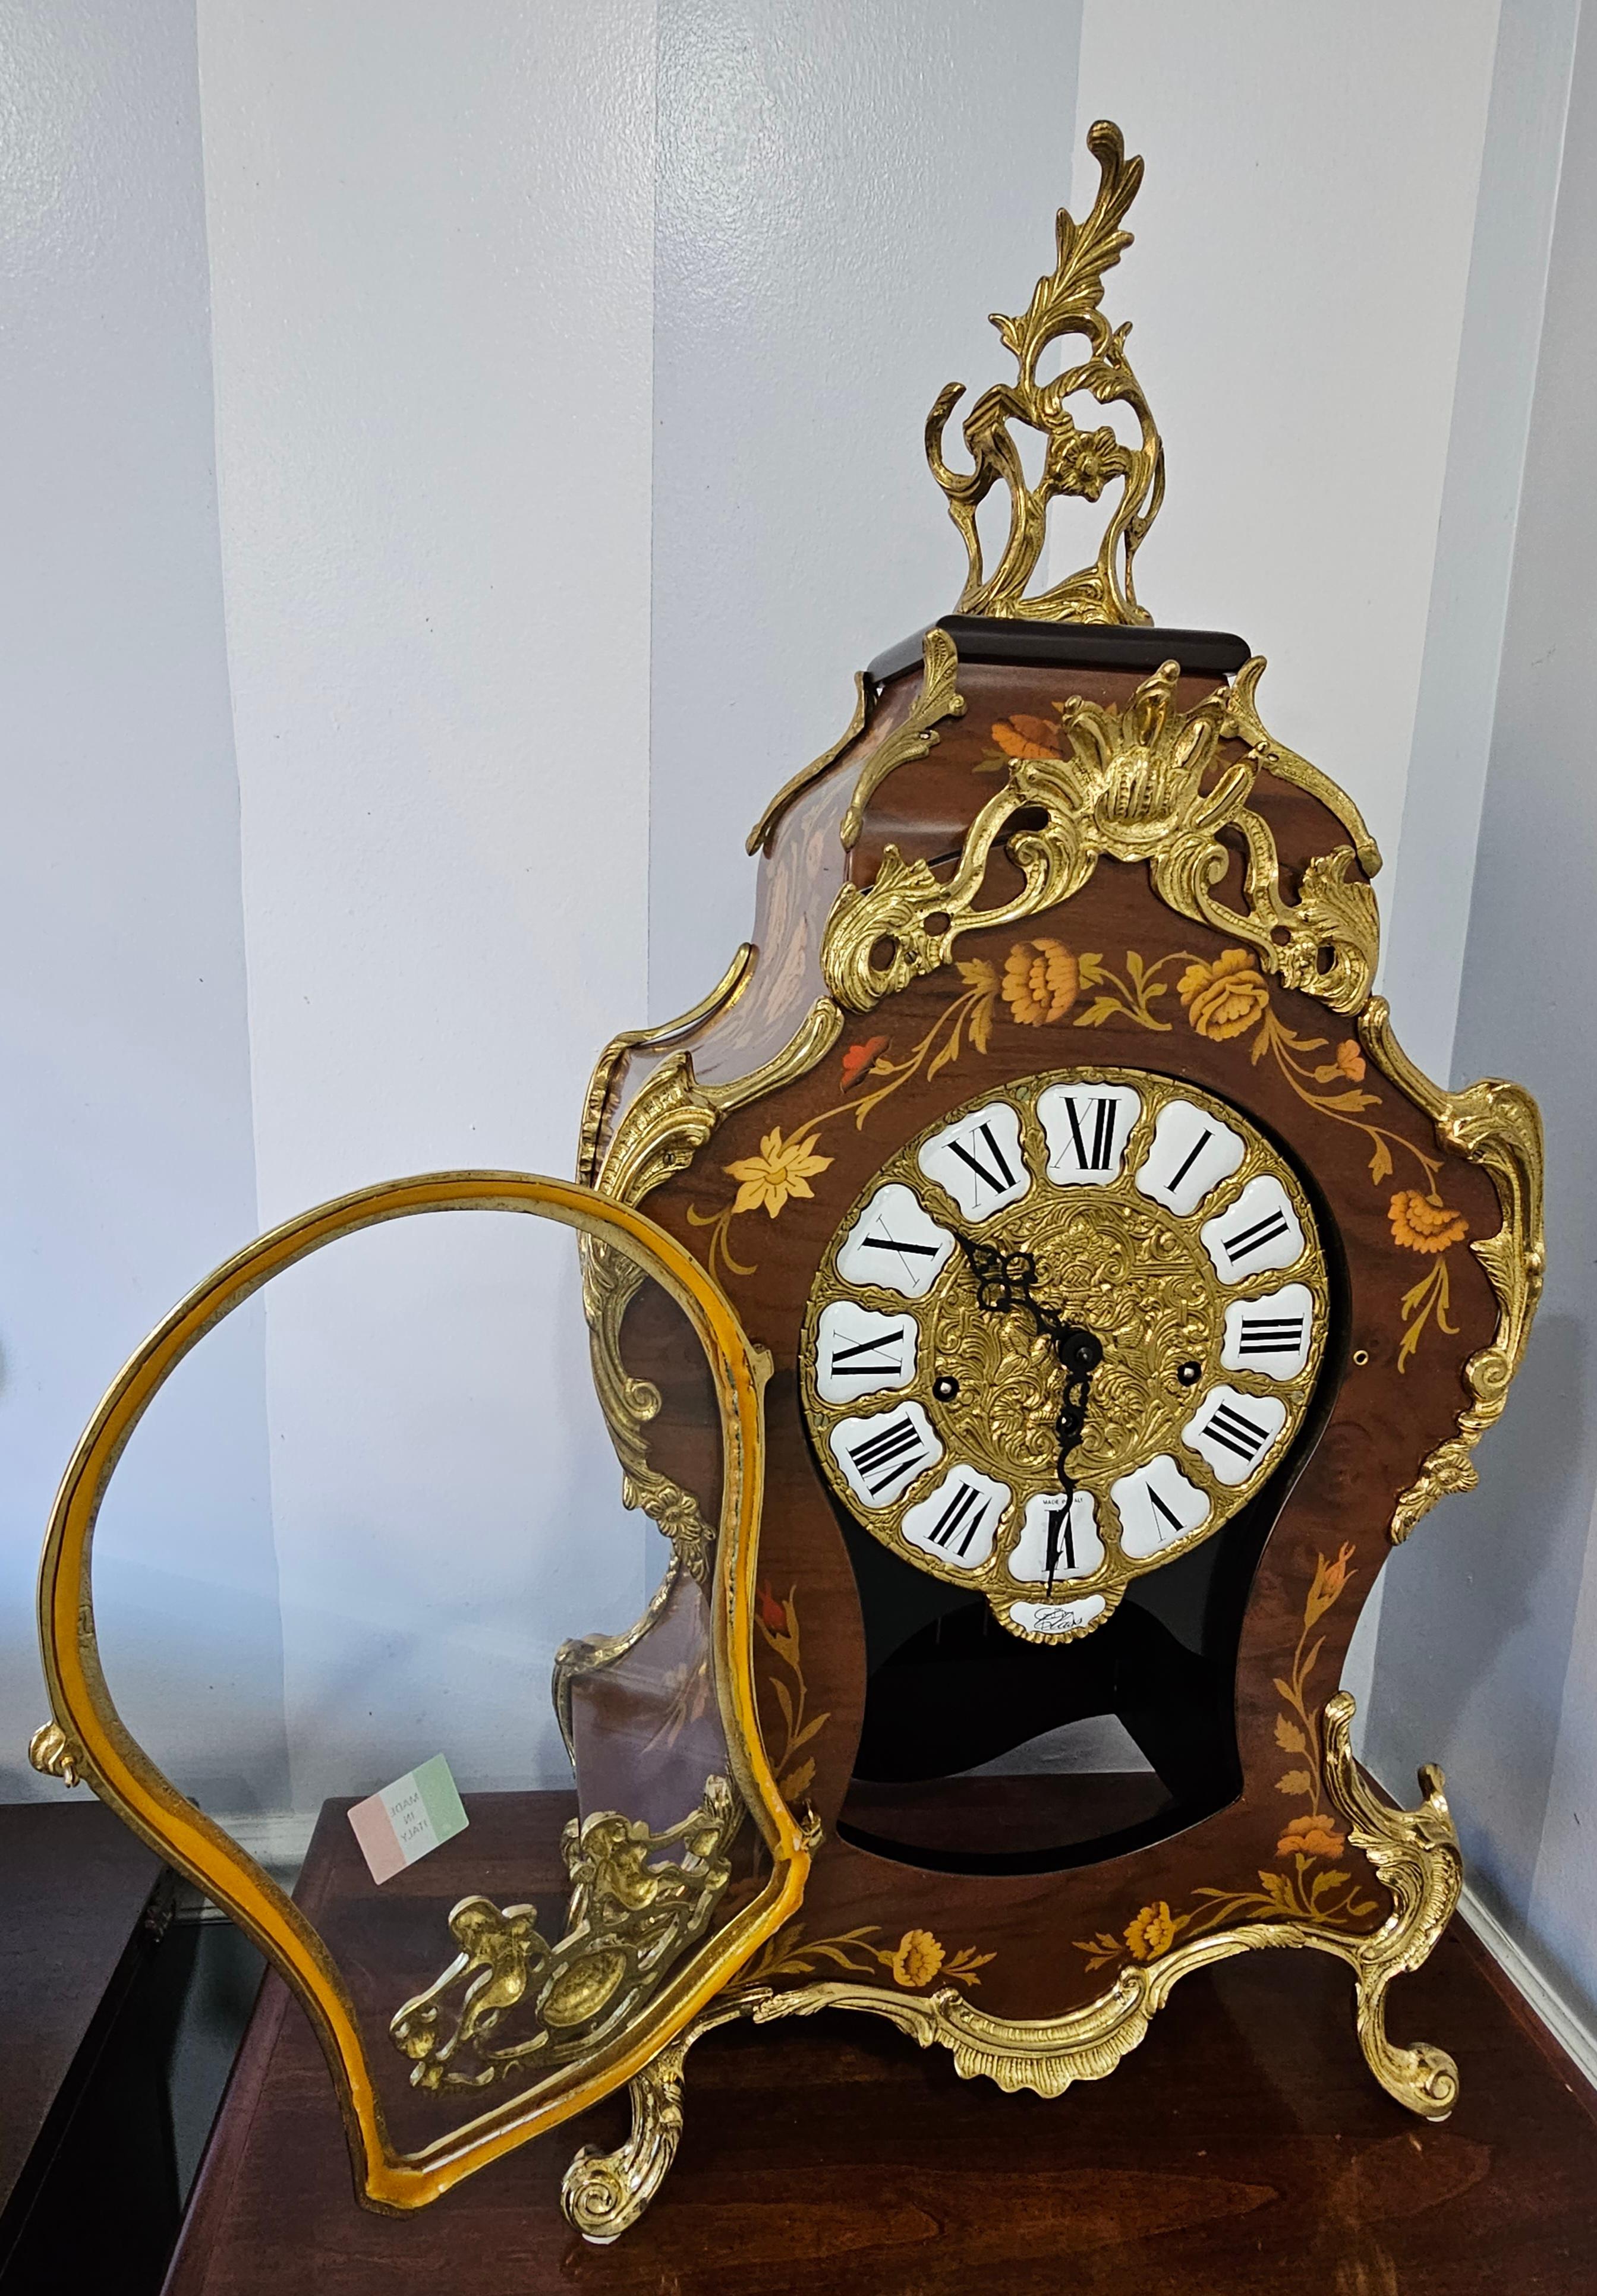 Post-Modern New Franz Hermle Mantel Clock in DeArt Italian Fine Marquetry and Ormolu Case, N For Sale